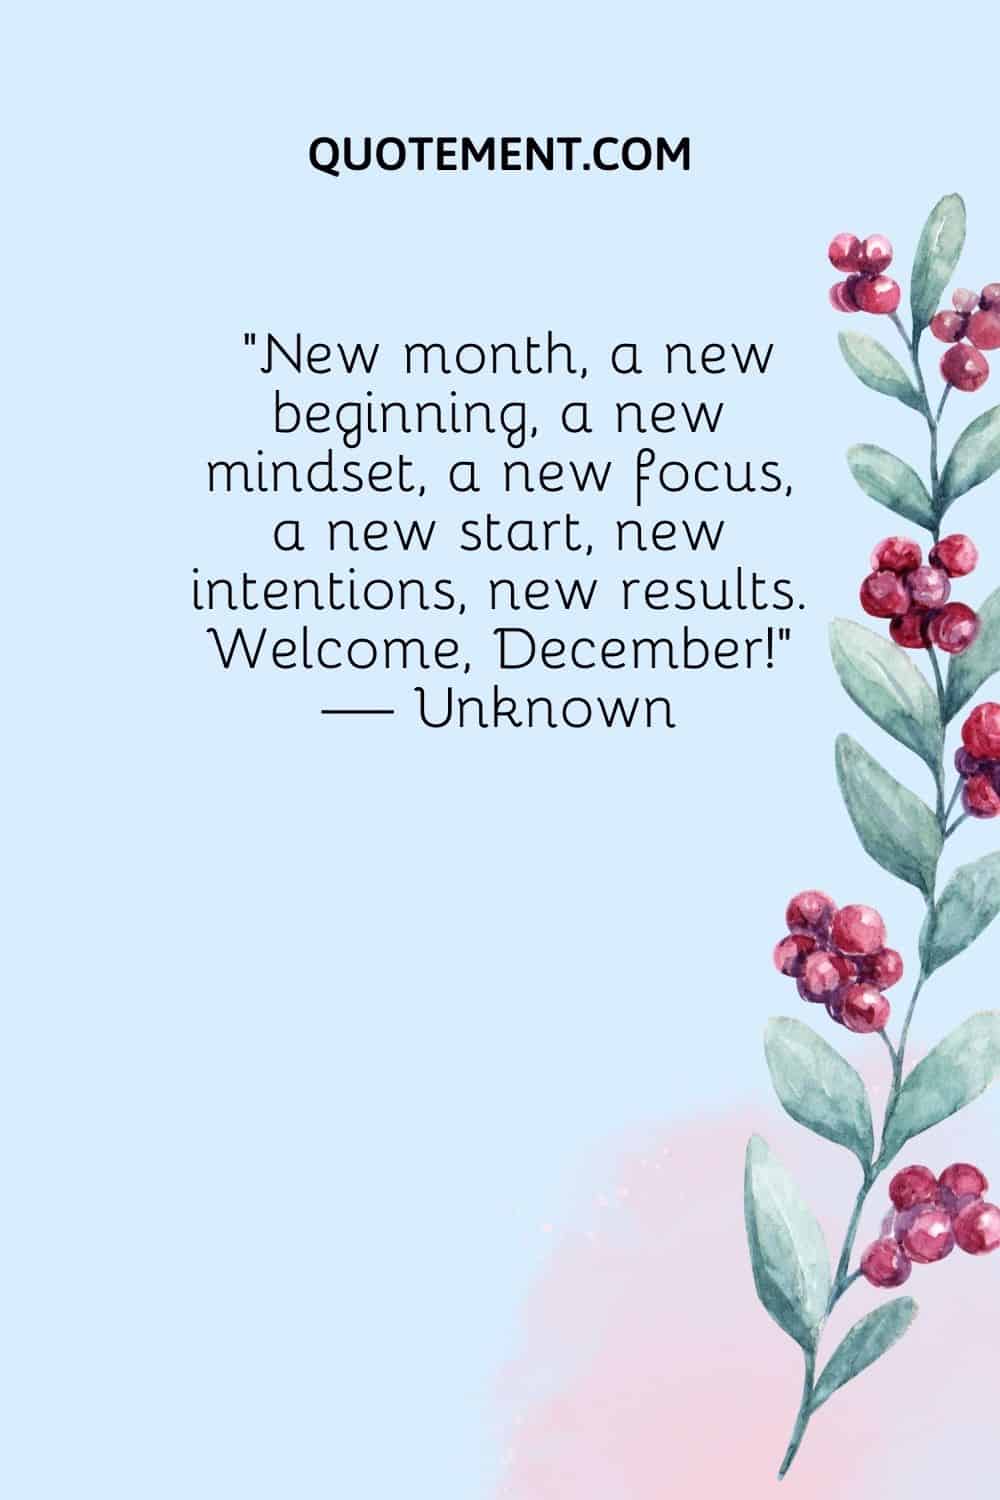 “New month, a new beginning, a new mindset, a new focus, a new start, new intentions, new results. Welcome, December!” — Unknown